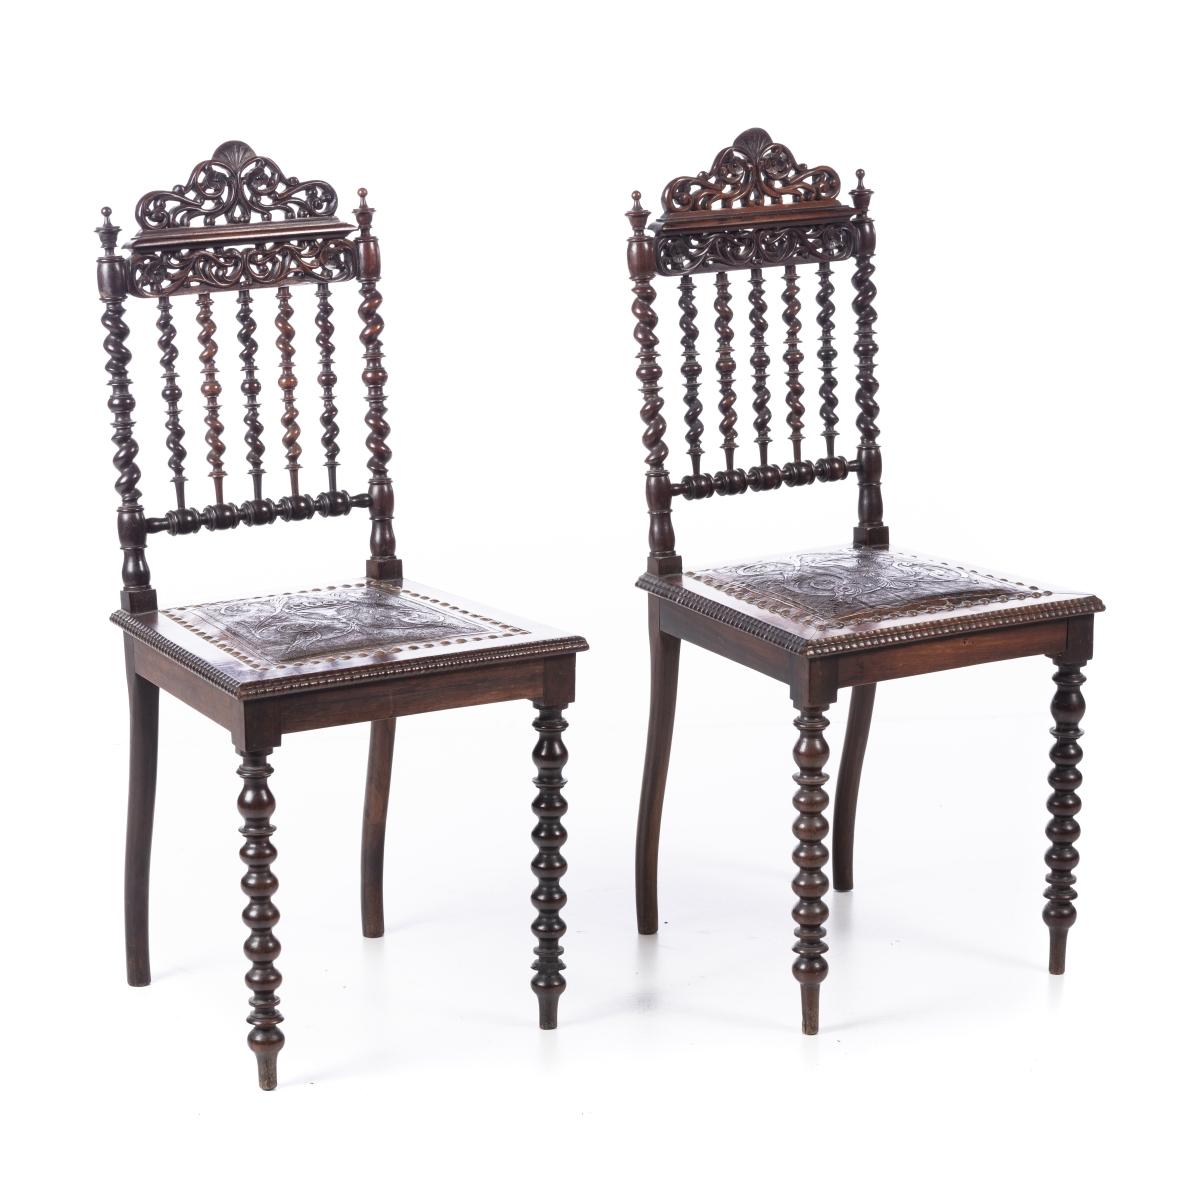 Hand-Crafted Pair of 19th Century Portuguese Chairs in Brazilian Rosewood